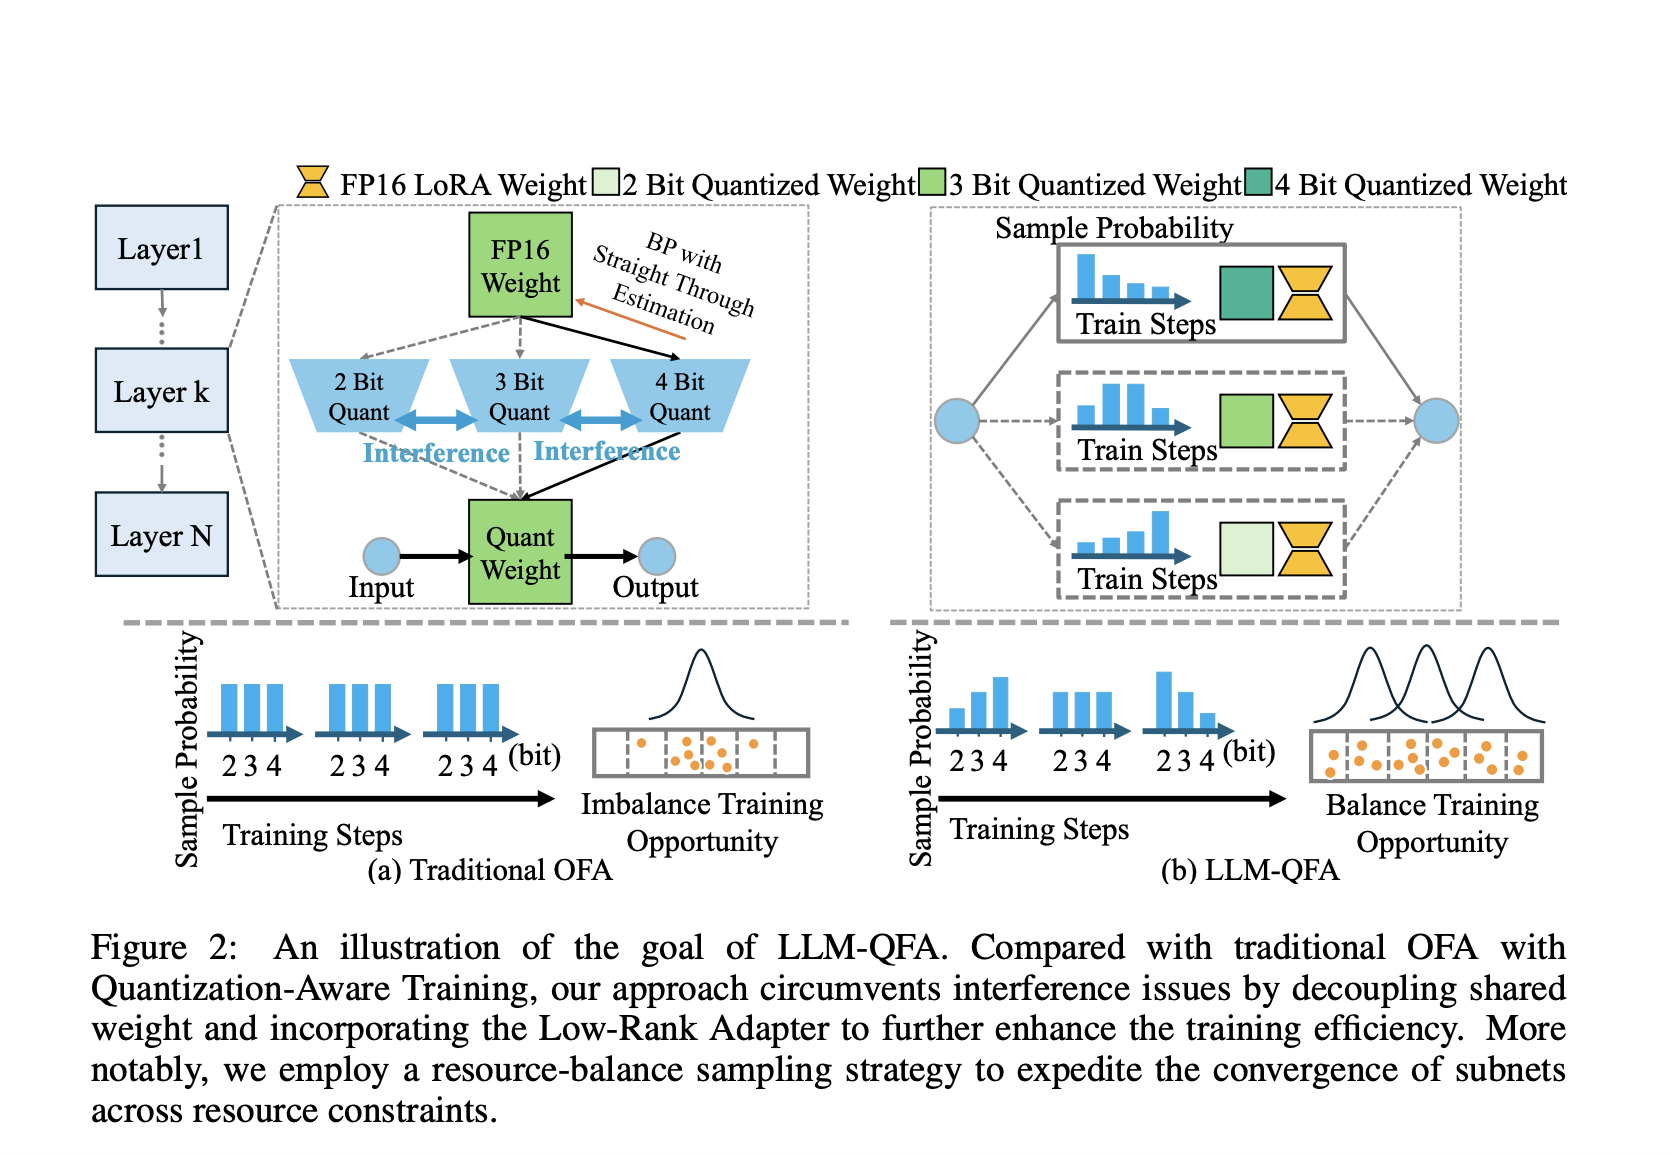  LLM-QFA Framework: A Once-for-All Quantization-Aware Training Approach to Reduce the Training Cost of Deploying Large Language Models (LLMs) Across Diverse Scenarios